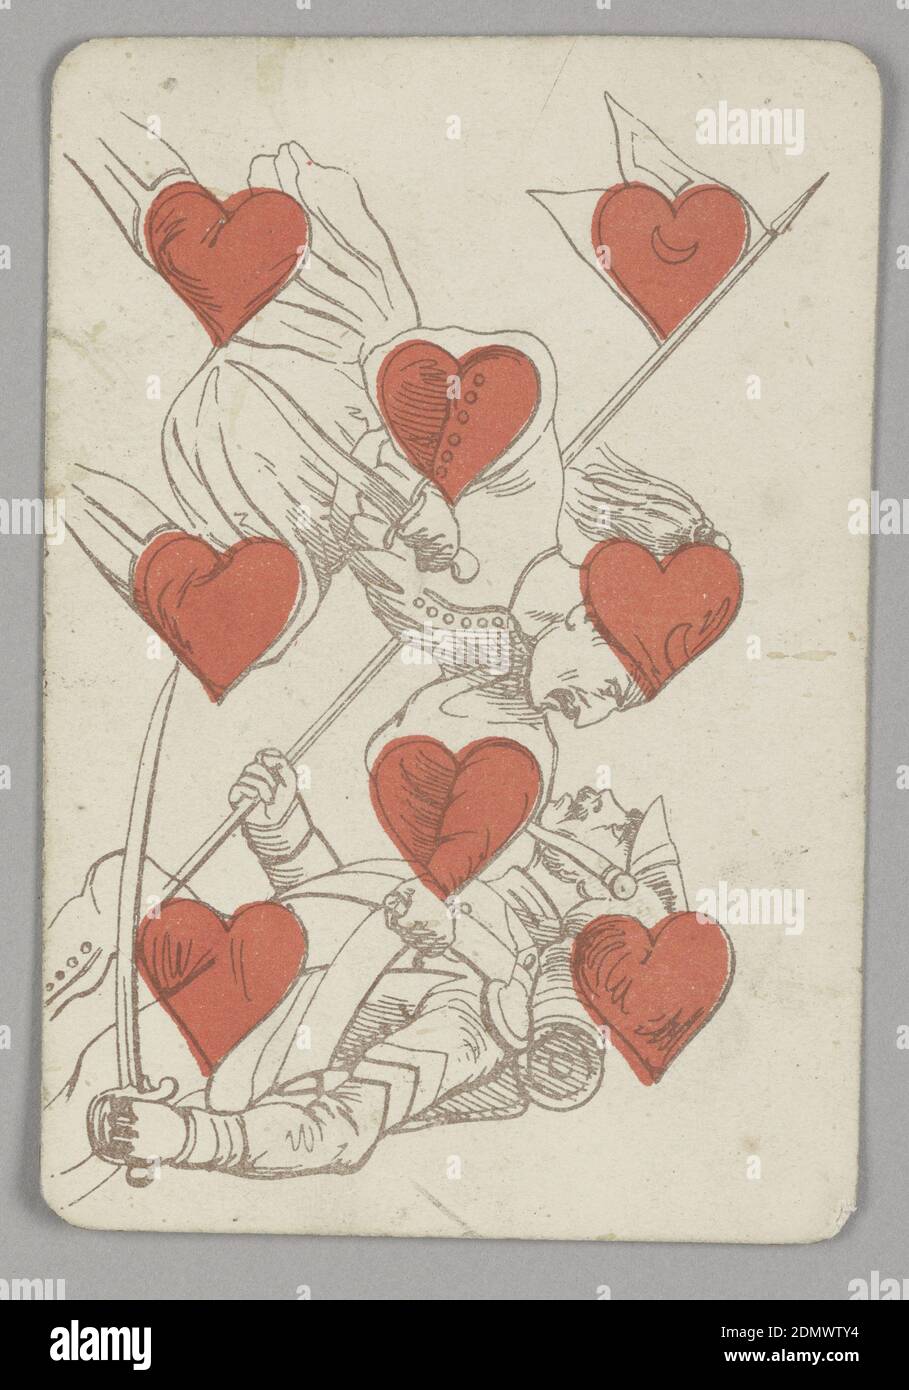 Eight of Hearts, E. Le Tellier, French, active late 19th century, B.P. Grimaud, Paris, France, Lithograph on paper, Eight of Hearts playing card from a pack of transformation playing cards. Vertically, a figural scene shown in outline, red hearts integrated into various parts of the scene. Two soldiers engaged in a swordfight, each in different costume. The figure at top stabs the man at bottom with a dagger; the injured man holds a long pole bearing a flag with a heart and crescent moon., Paris, France, late 19th century, toys & games, Playing card Stock Photo